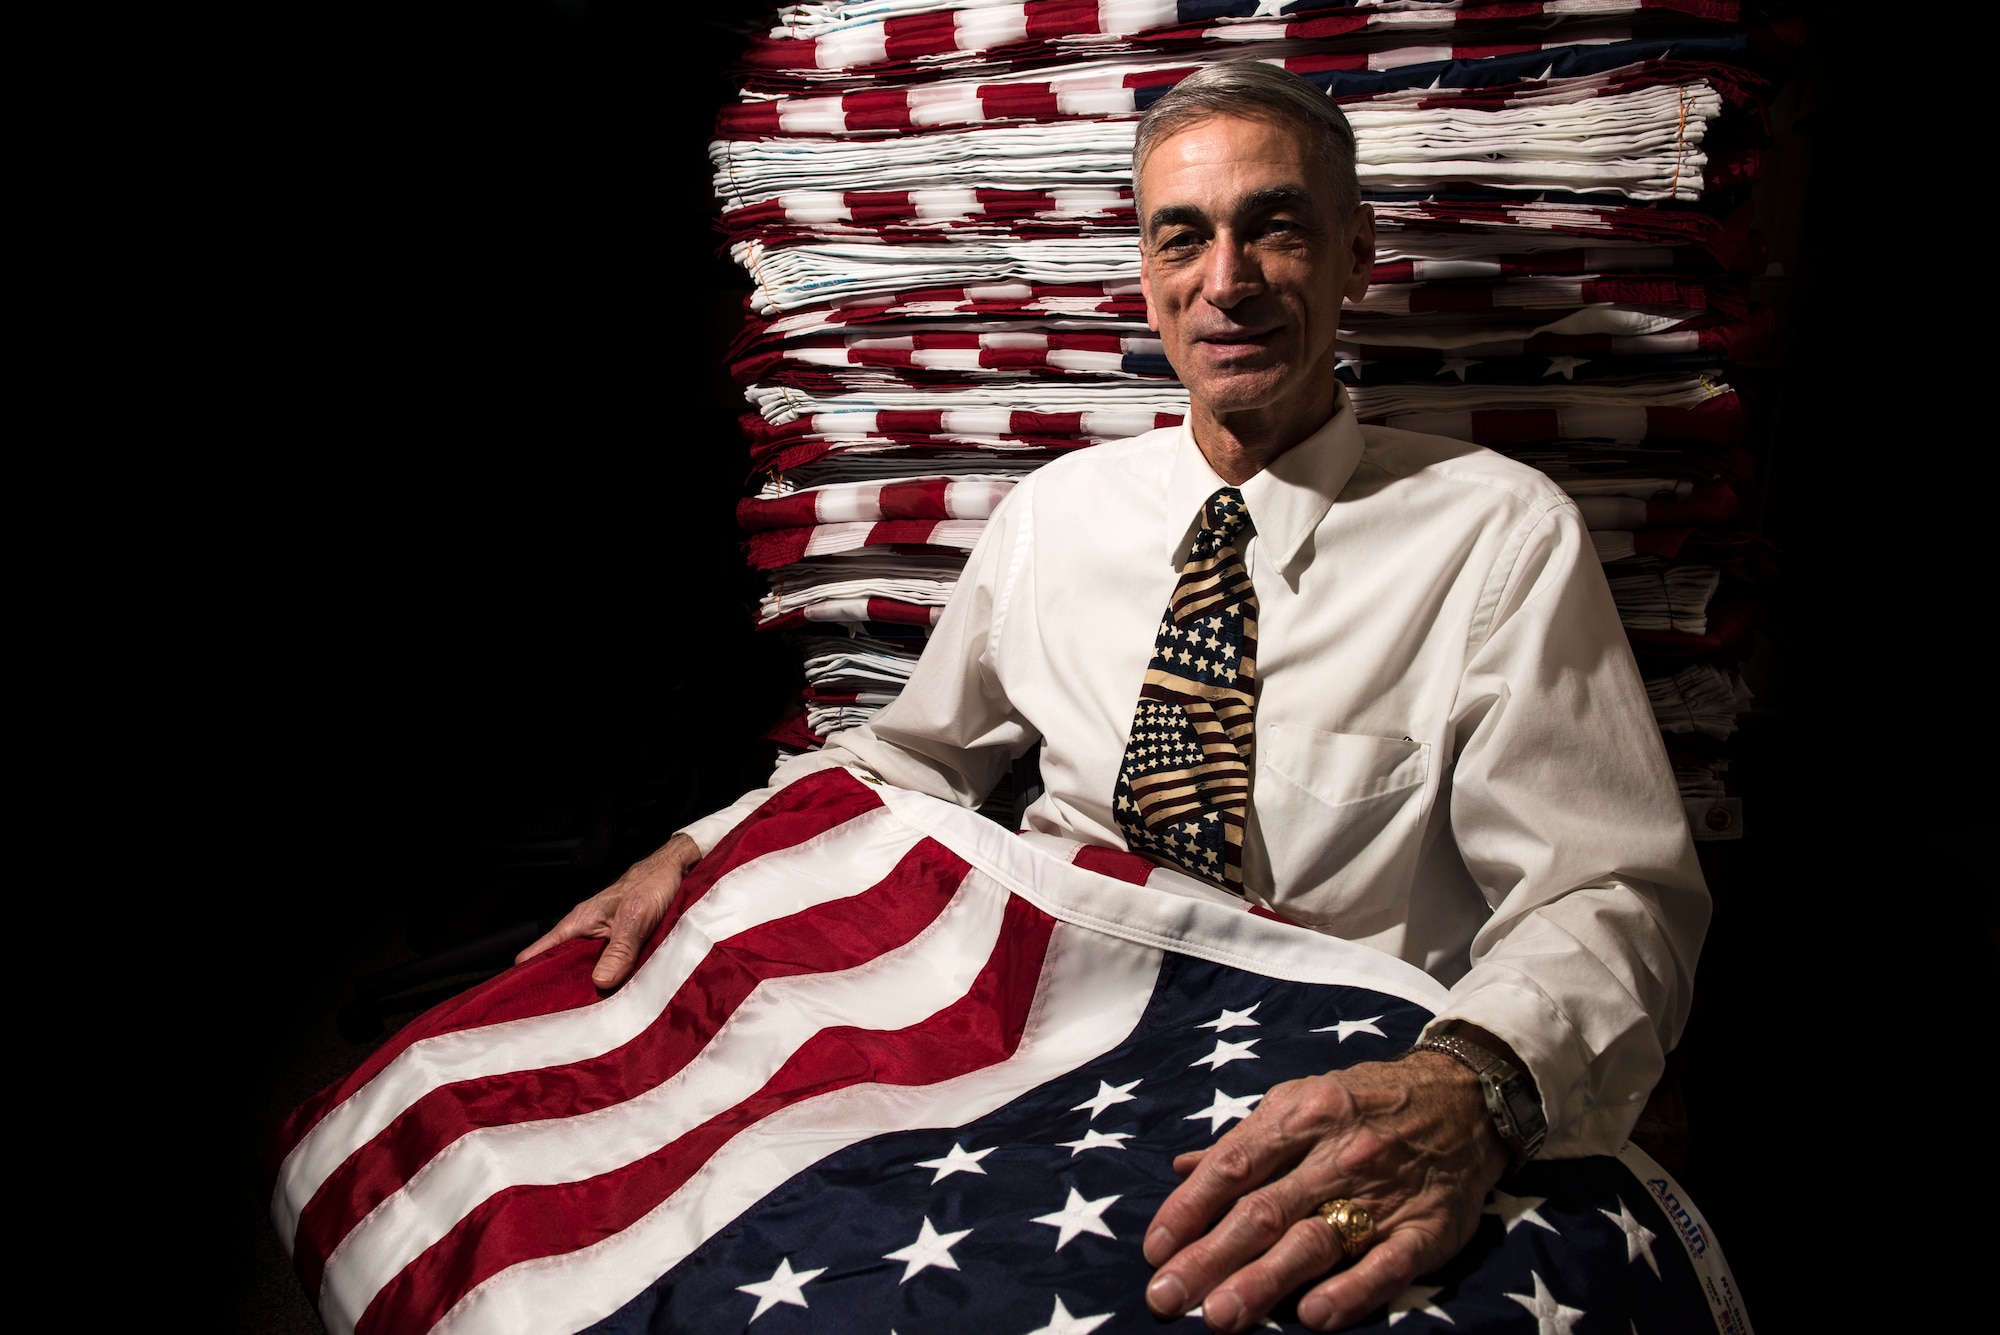 Army veteran Alvin Nieder poses with the flags that he and his team will raise outside the Pentagon in Washington, D.C., in honor of Memorial Day. Nieder has volunteered to organize this flag raising event since 2002. (U.S. Air Force photo/Staff Sgt. Alyssa Gibson)